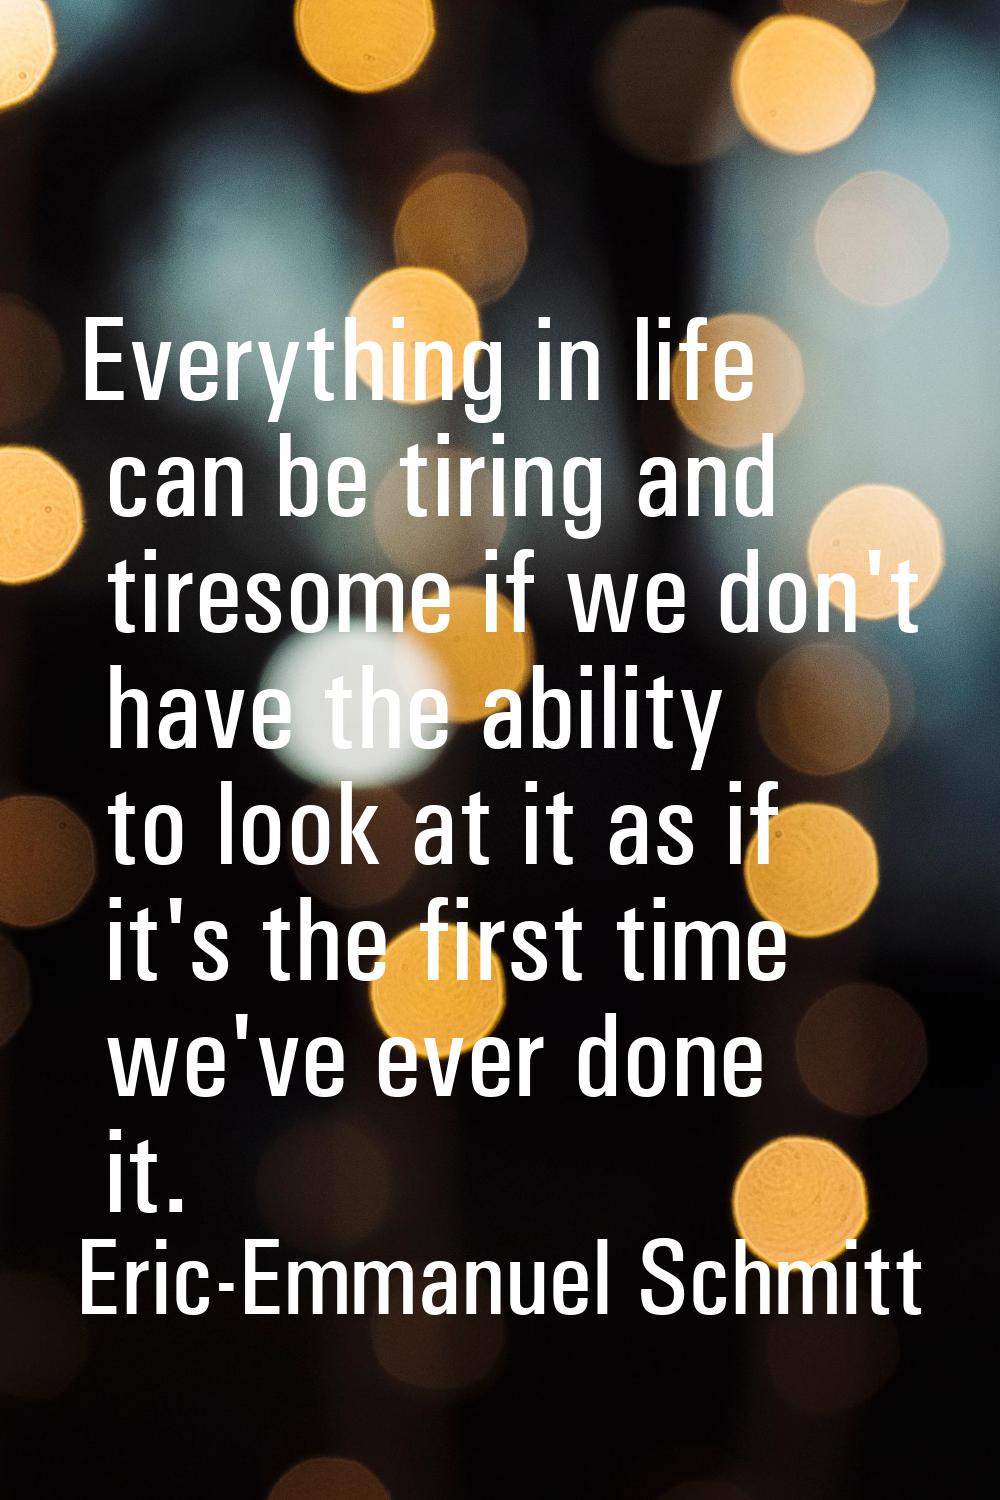 Everything in life can be tiring and tiresome if we don't have the ability to look at it as if it's